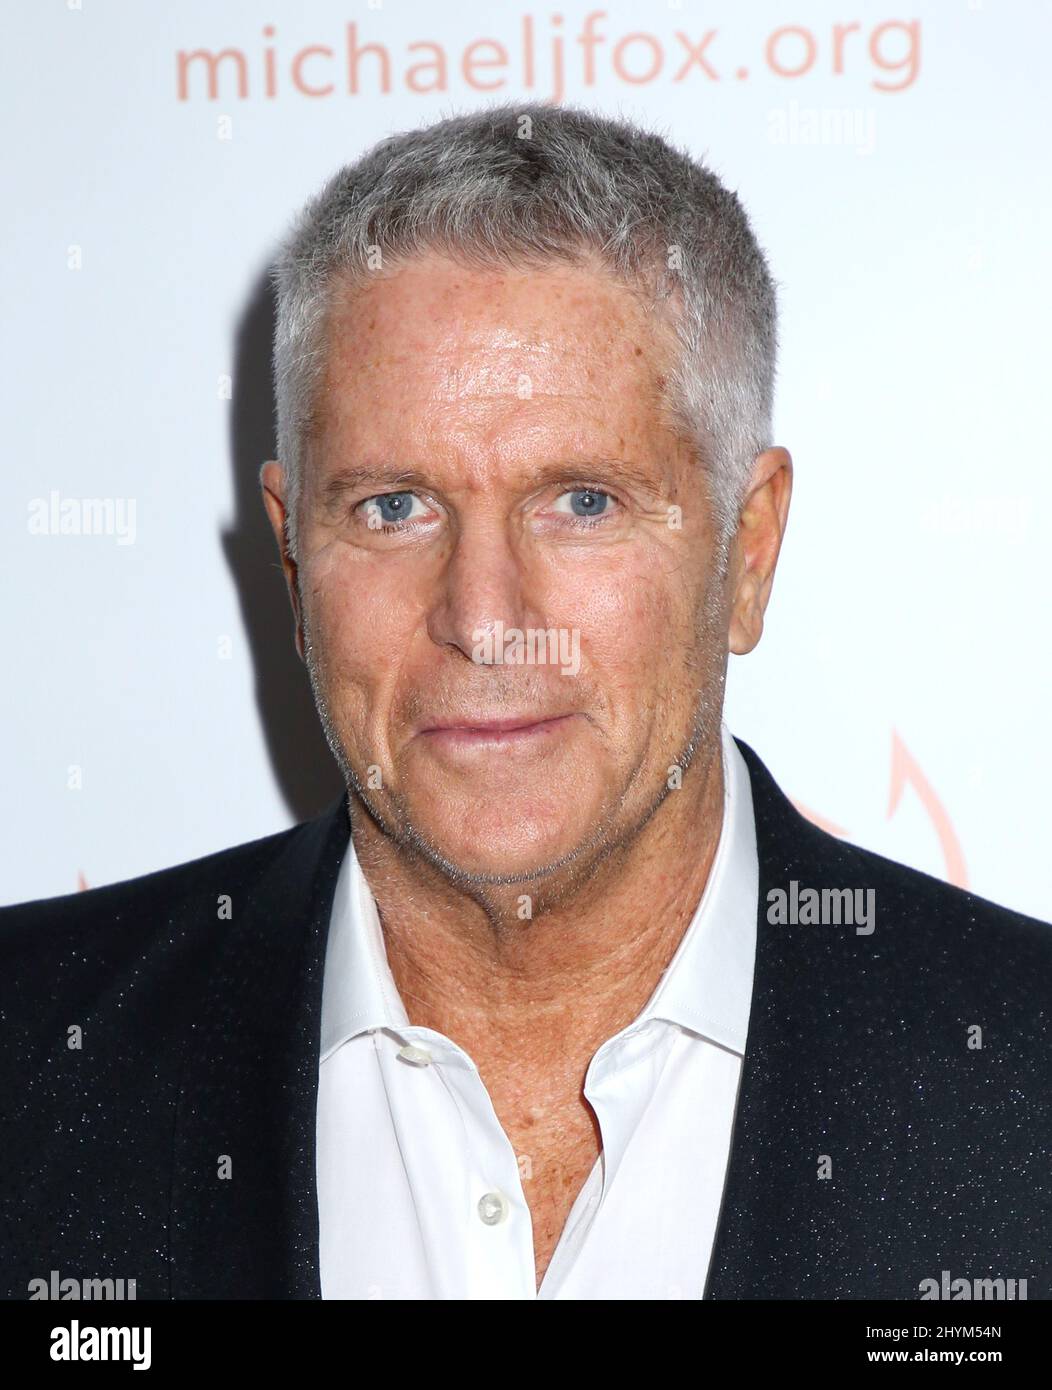 Donny Deutsch attending the Michael J. Fox Foundation Gala 2019 'A Funny Thing Happened on the Way to Cure Parkinson's' held at Hilton New York on November 16, 2019 in New York City, USA. Stock Photo